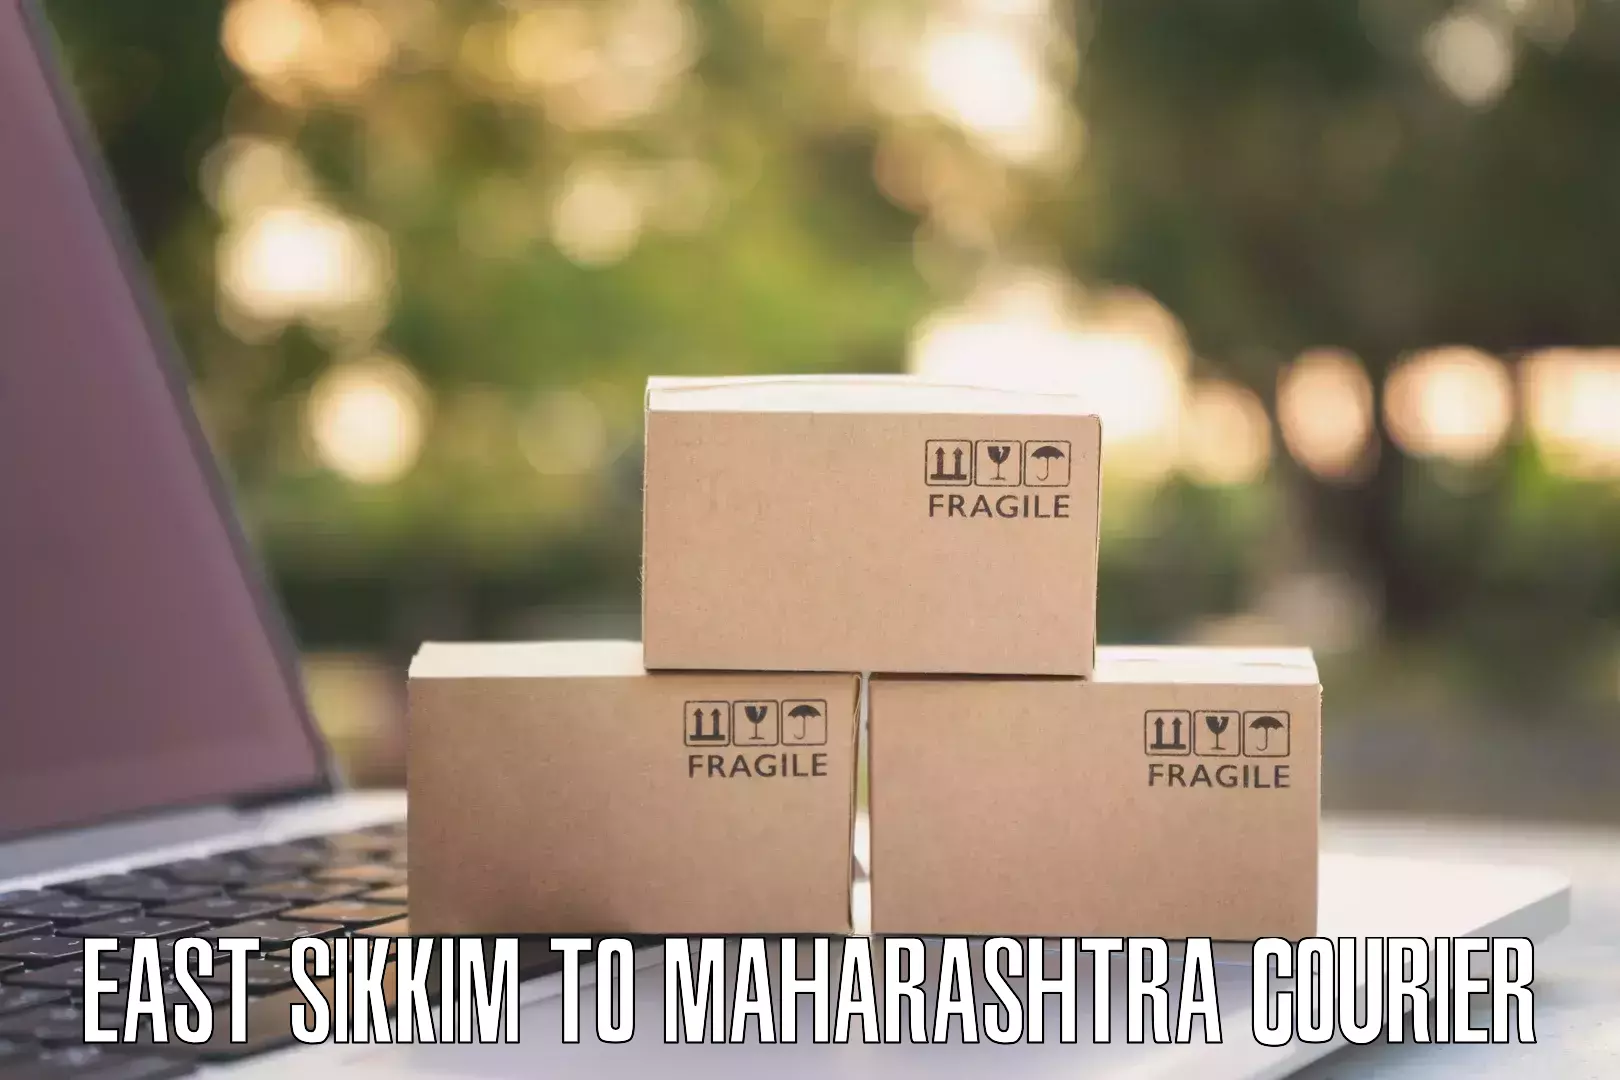 State-of-the-art courier technology in East Sikkim to Omerga